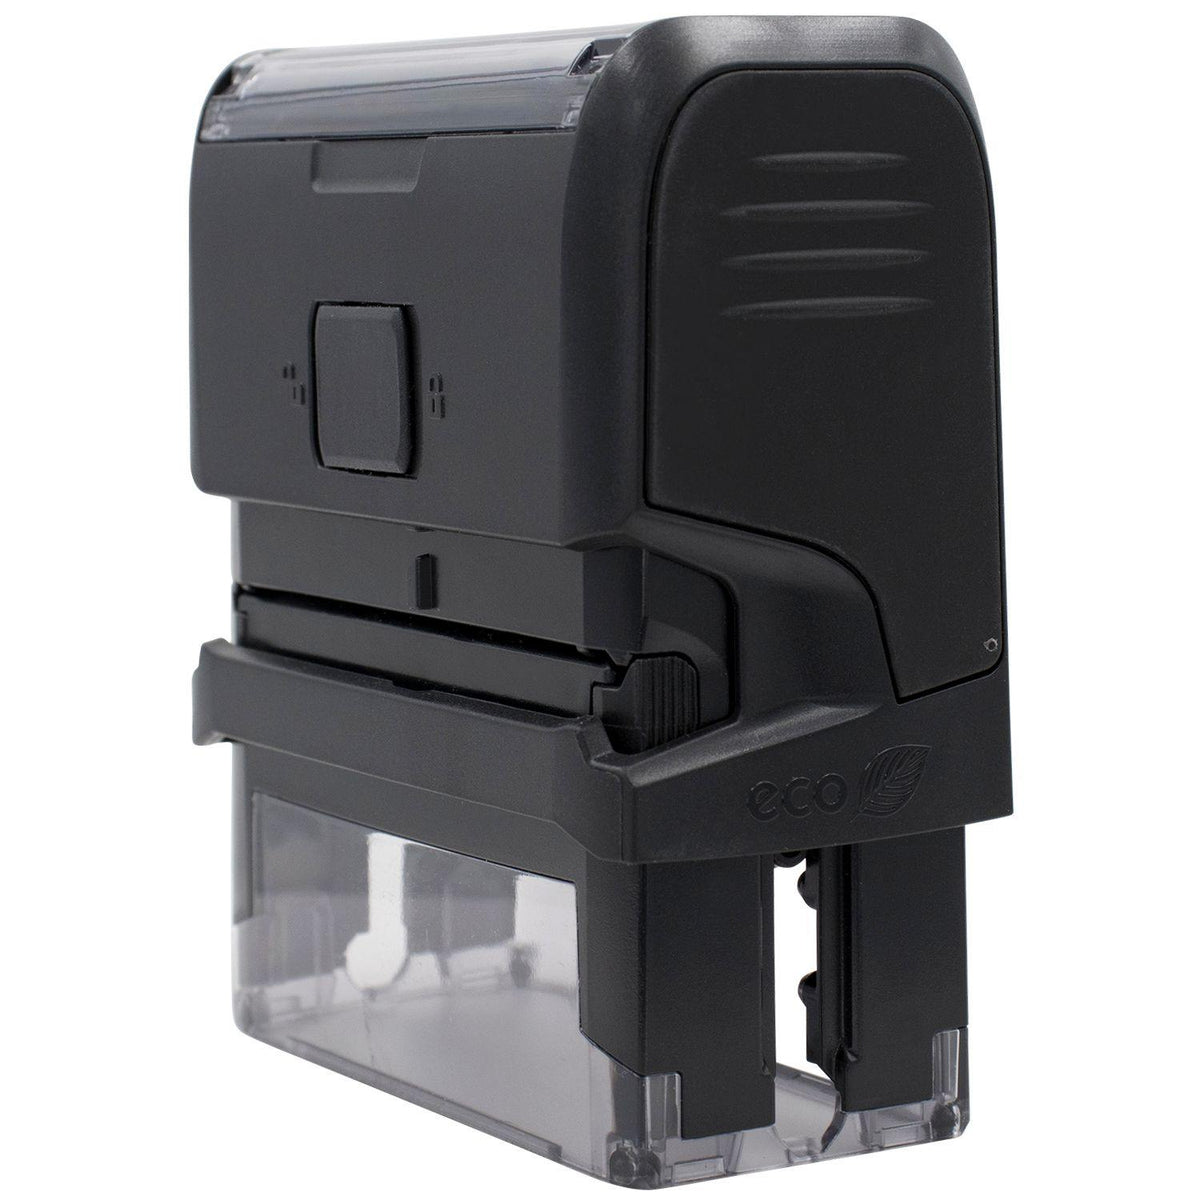 Self-Inking Certificada Stamp - Engineer Seal Stamps - Brand_Trodat, Impression Size_Small, Stamp Type_Self-Inking Stamp, Type of Use_Office, Type of Use_Postal &amp; Mailing